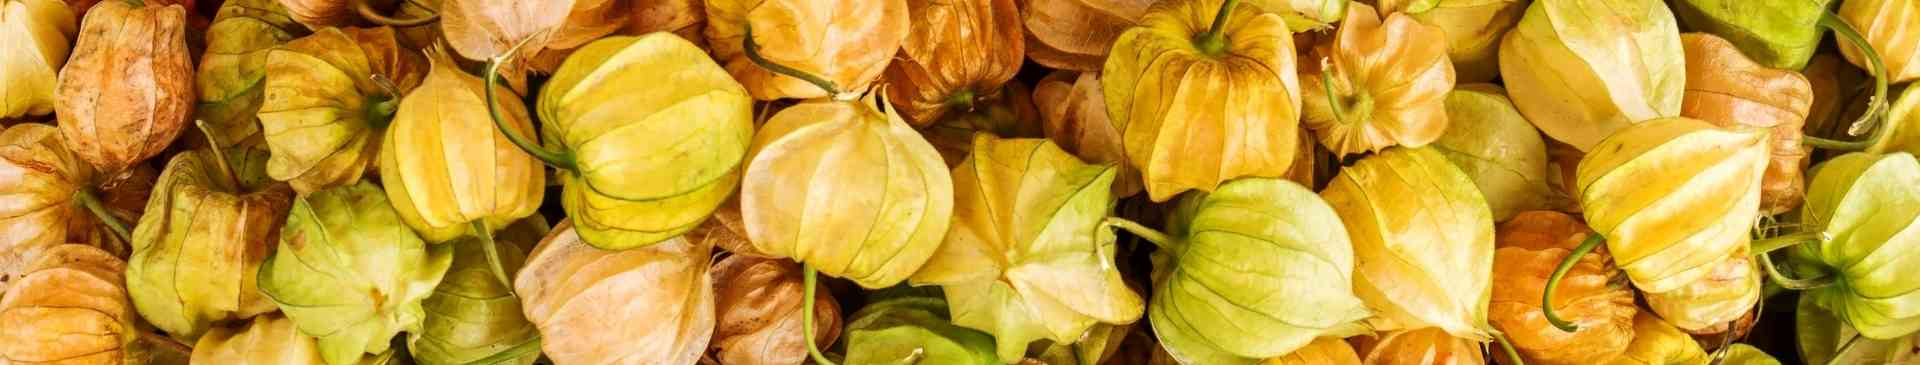 Fabulous Physalis: Tomatillo, Cape Gooseberry and Cossack Pineapple